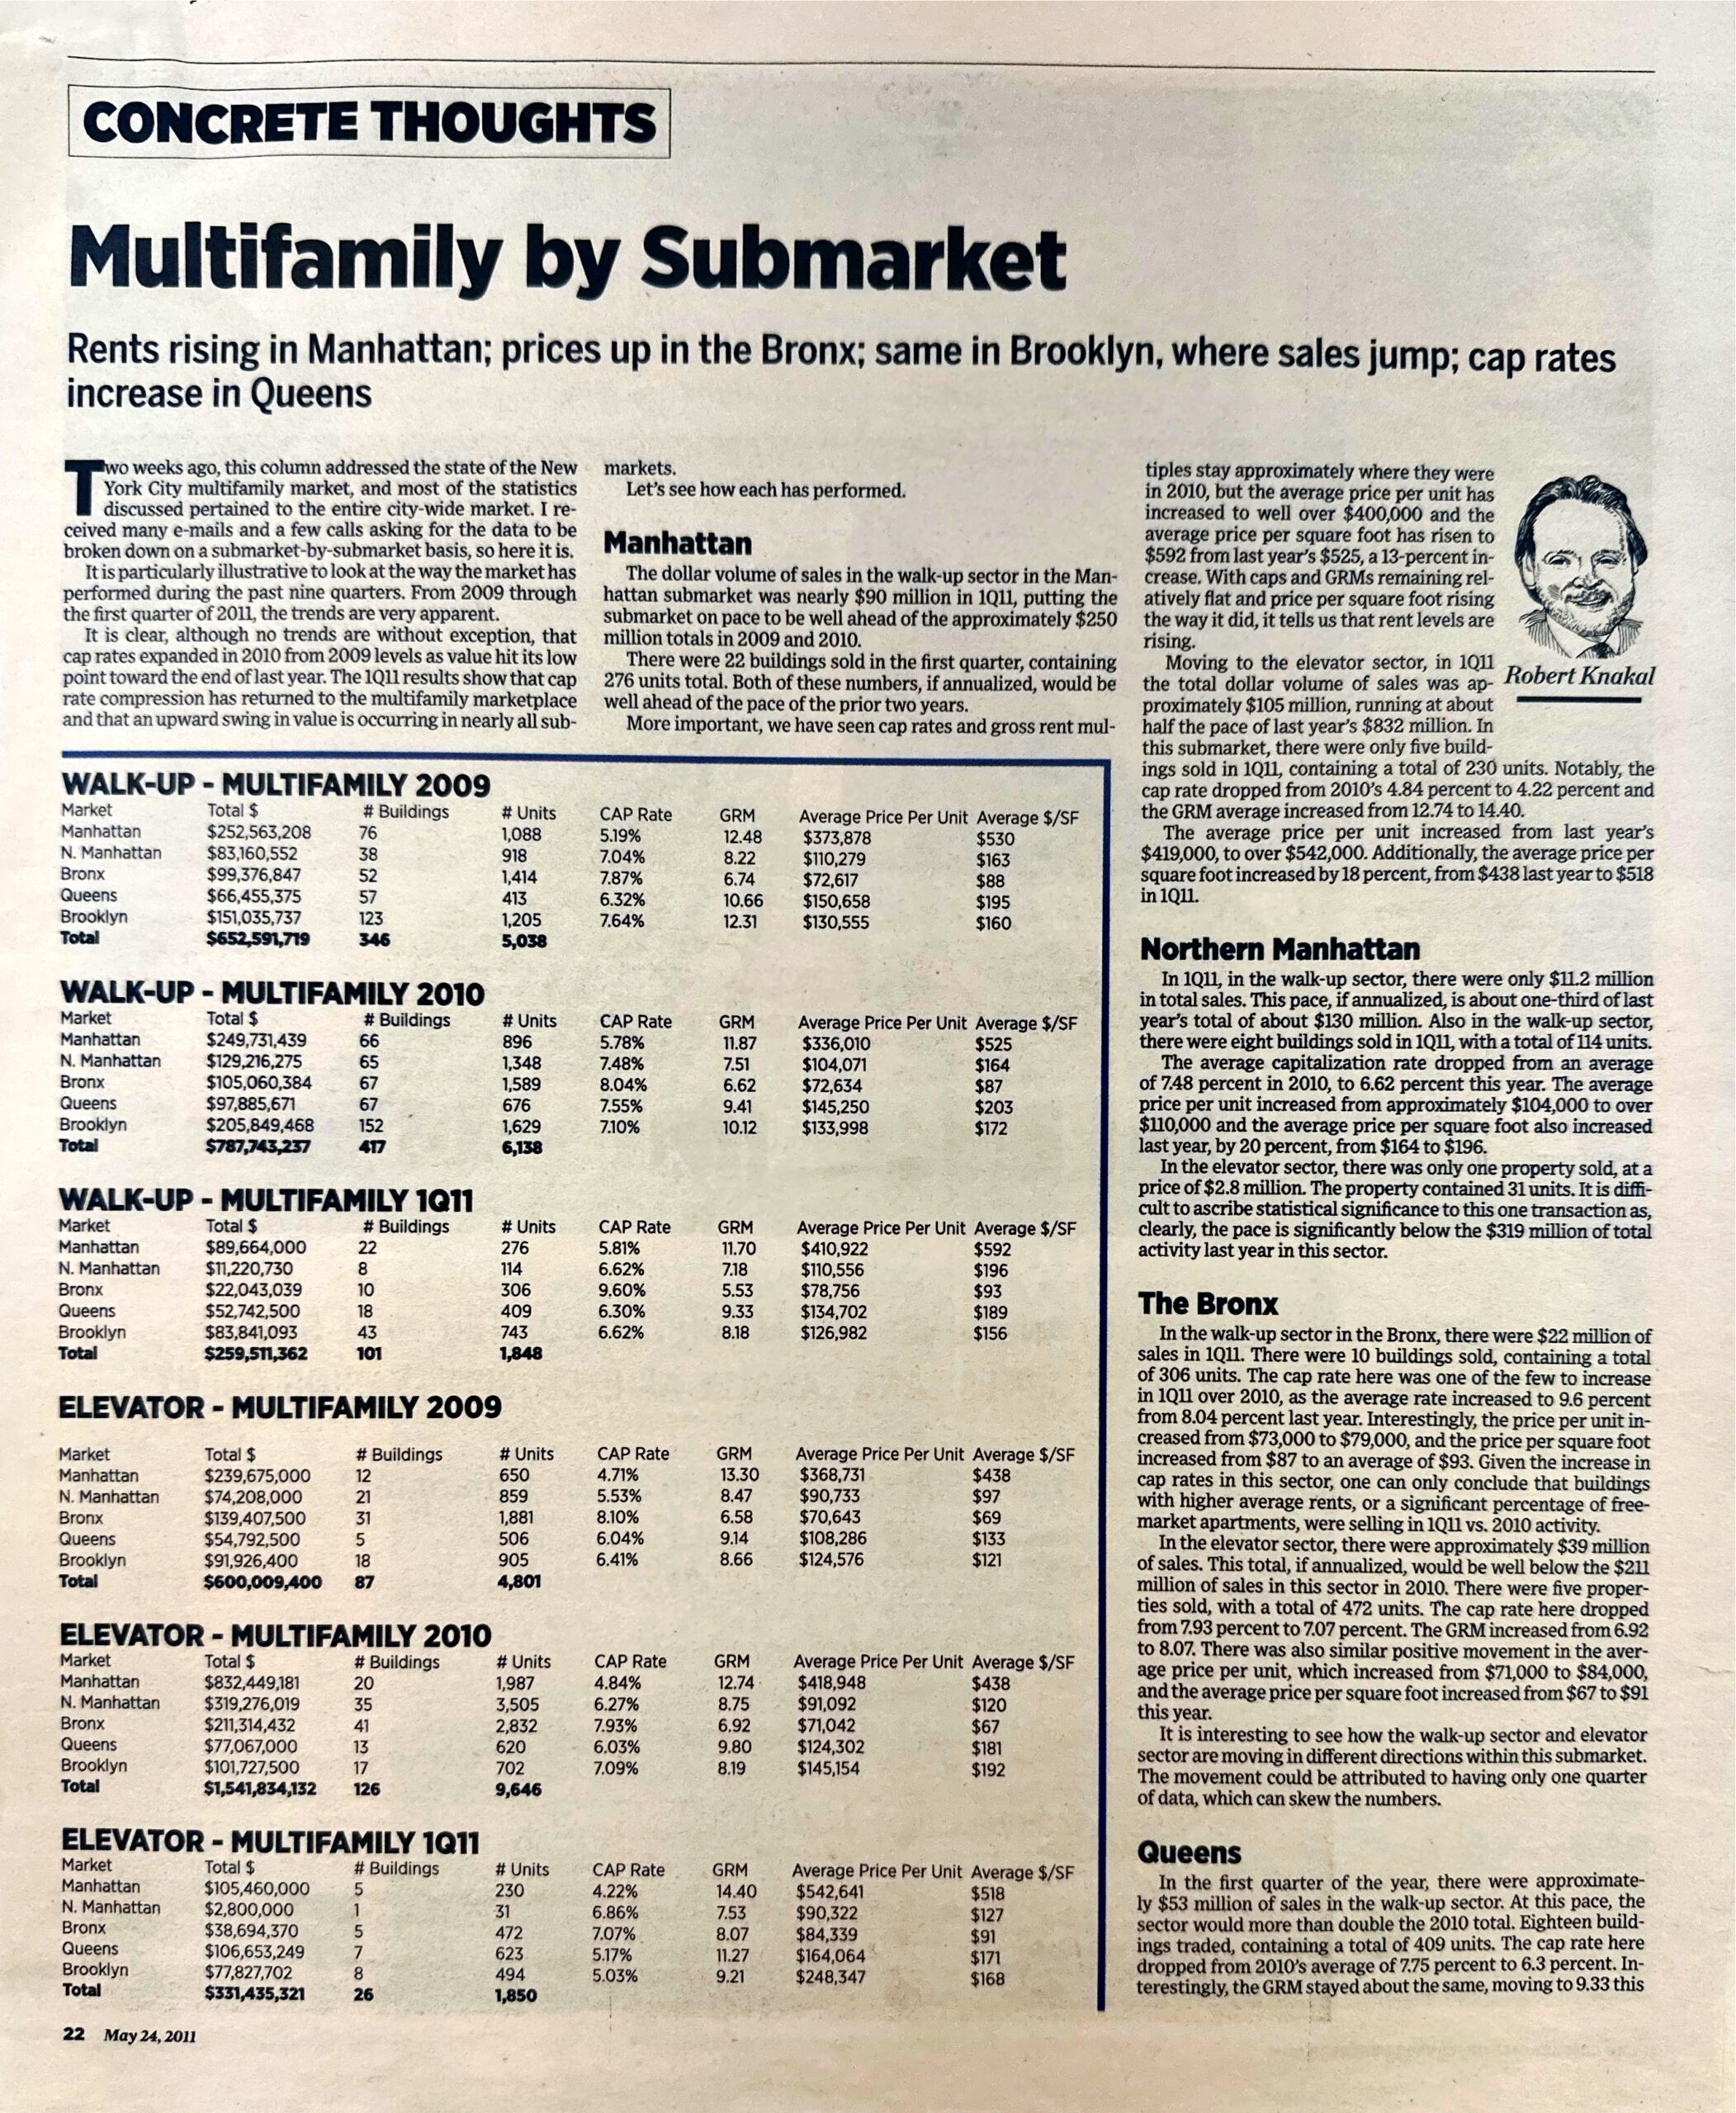 Multifamily by Submarket - May 24 2011